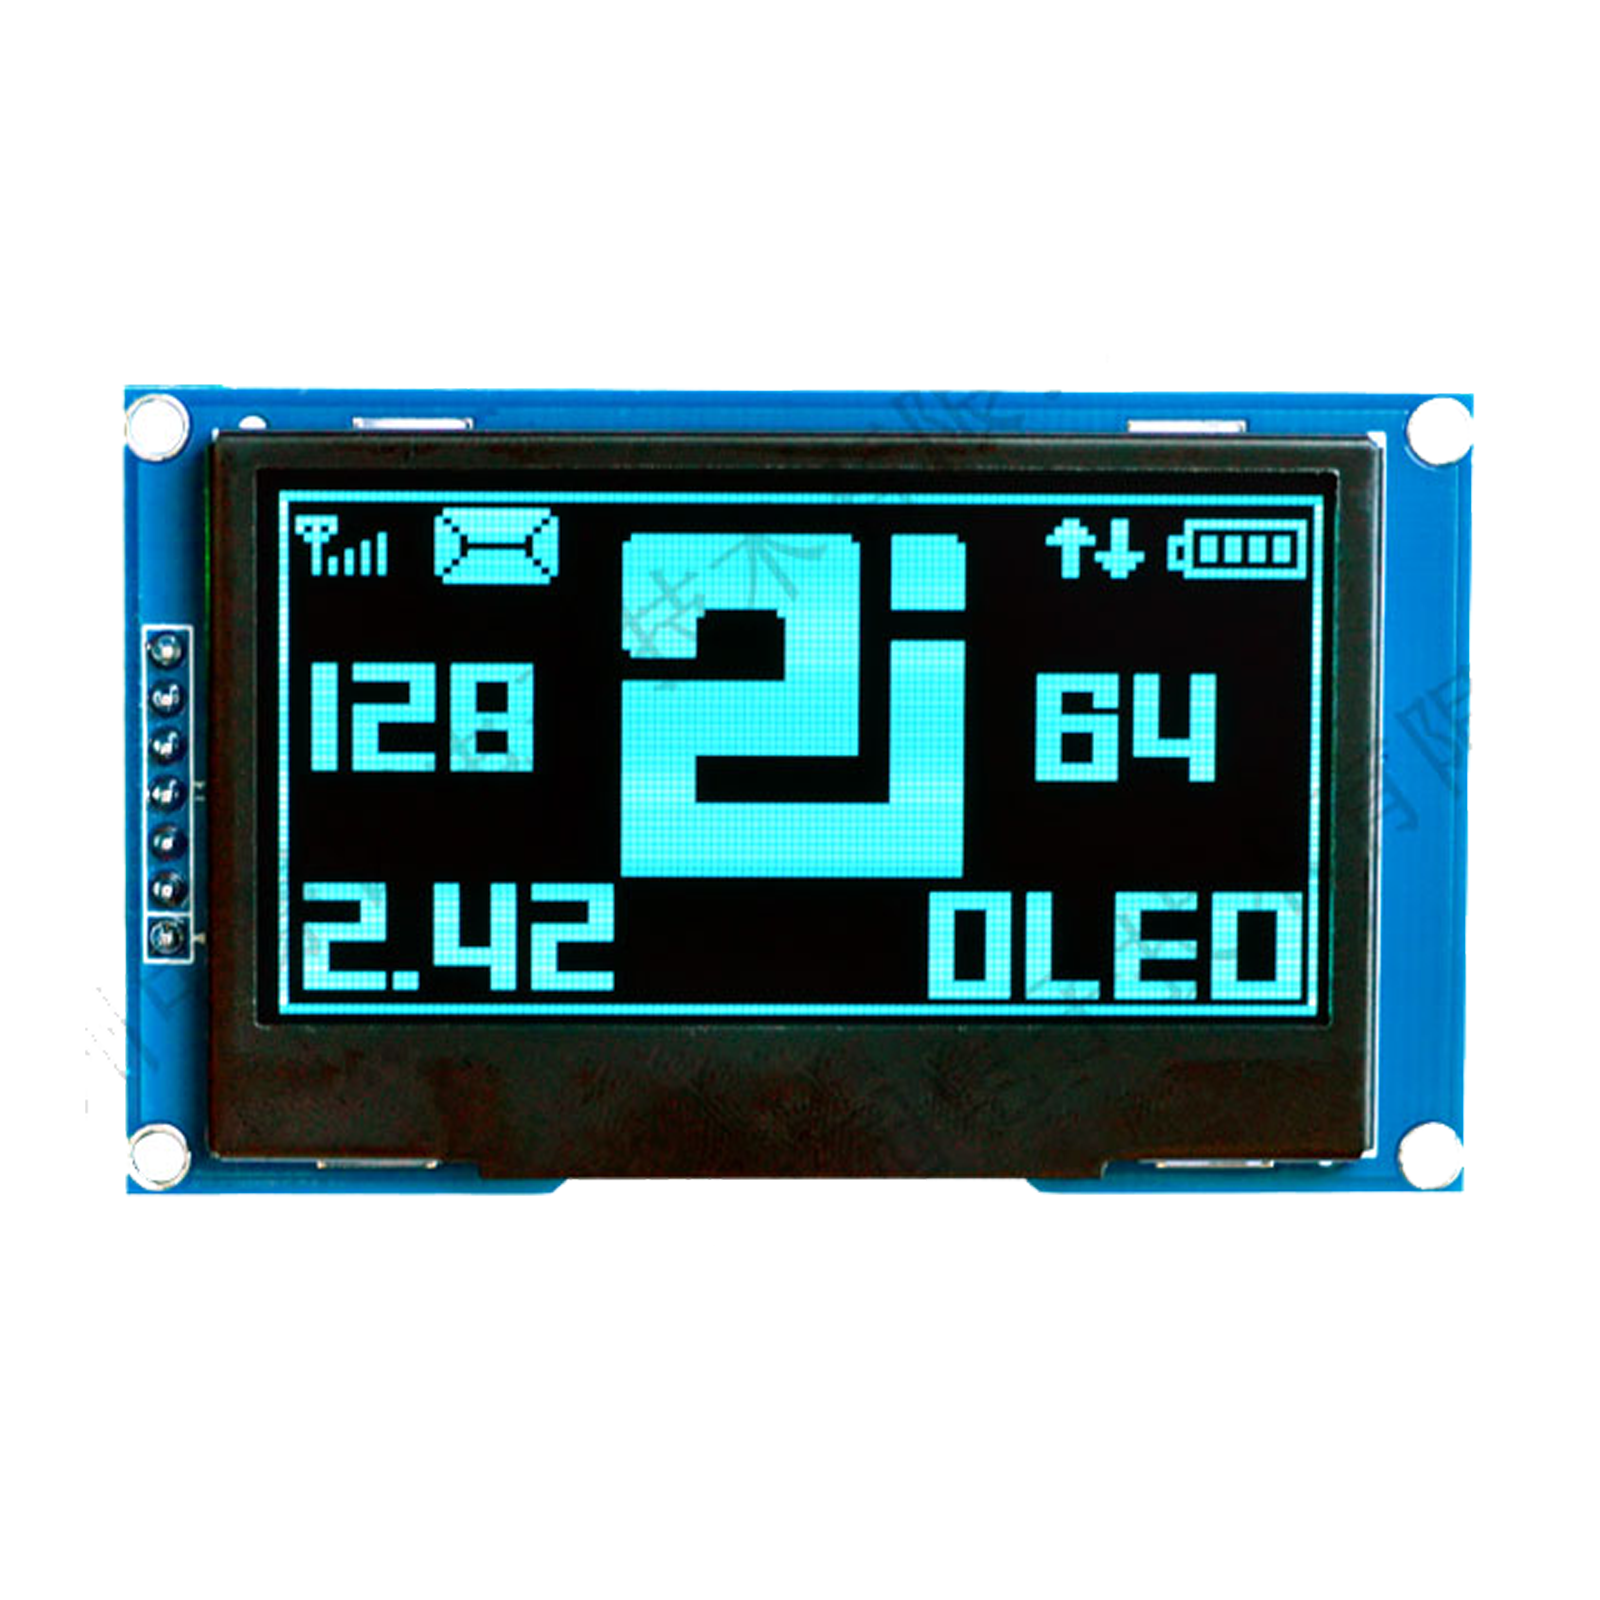 Blue 2.4-inch screen displaying some numbers